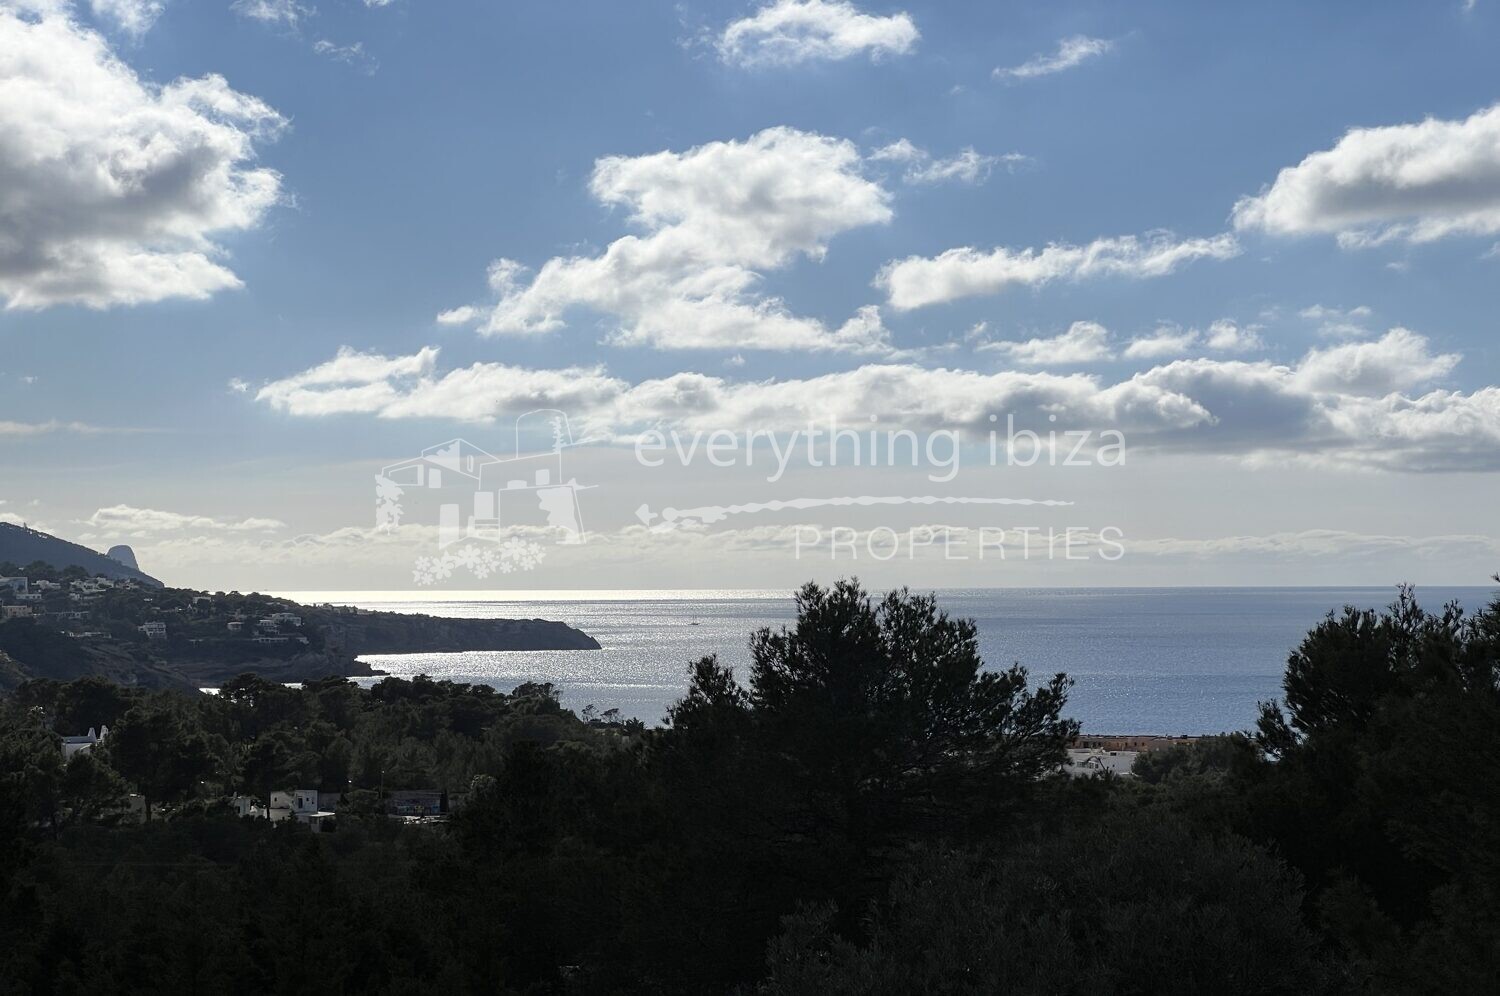 Magnificent Hilltop Villa with Super Views, ref. 1429, for sale in Ibiza by everything ibiza Properties